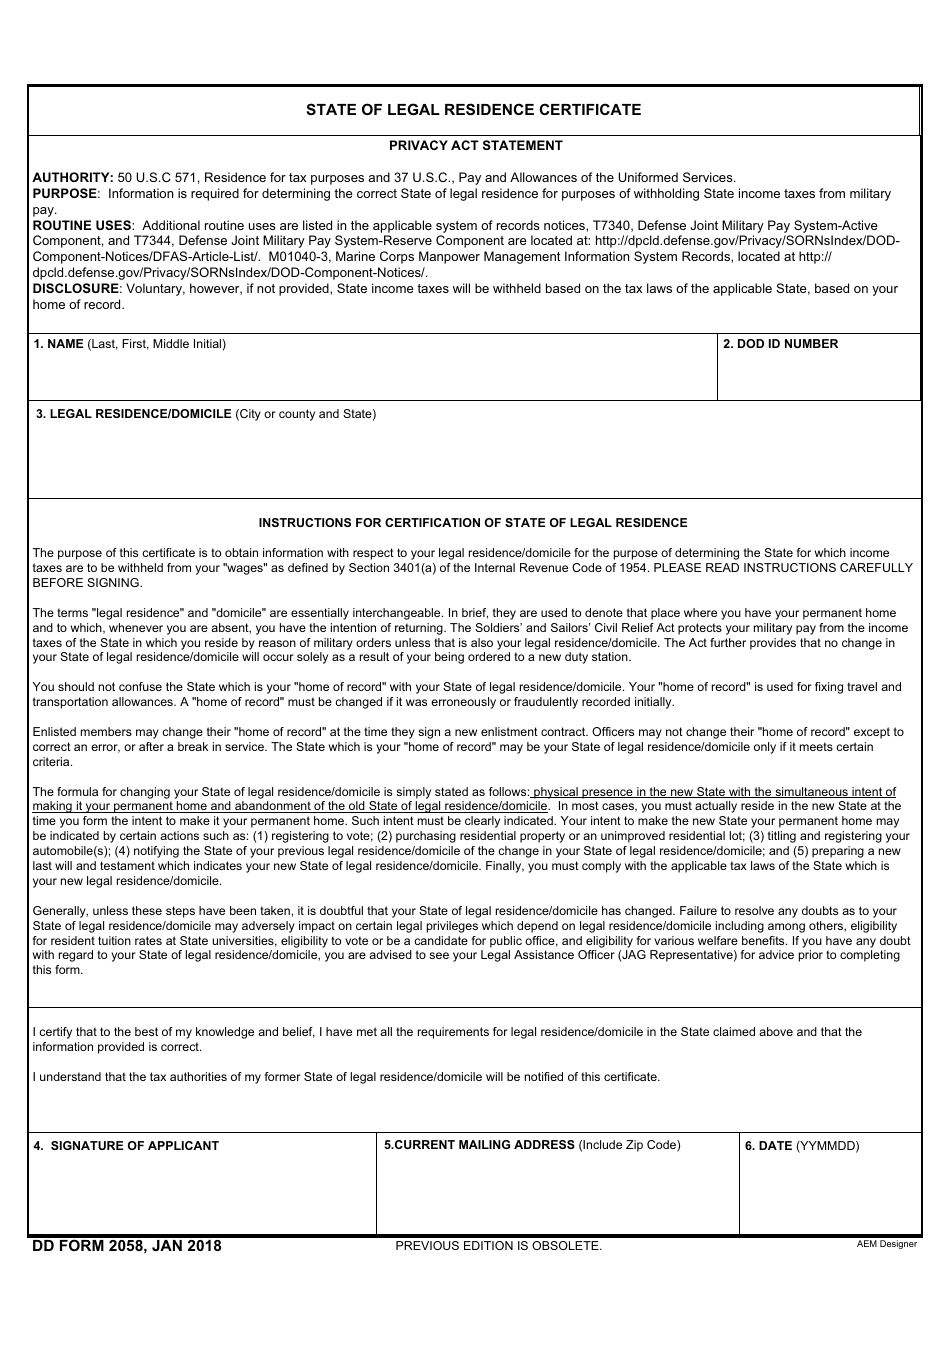 DD Form 2058 State of Legal Residence Certificate, Page 1